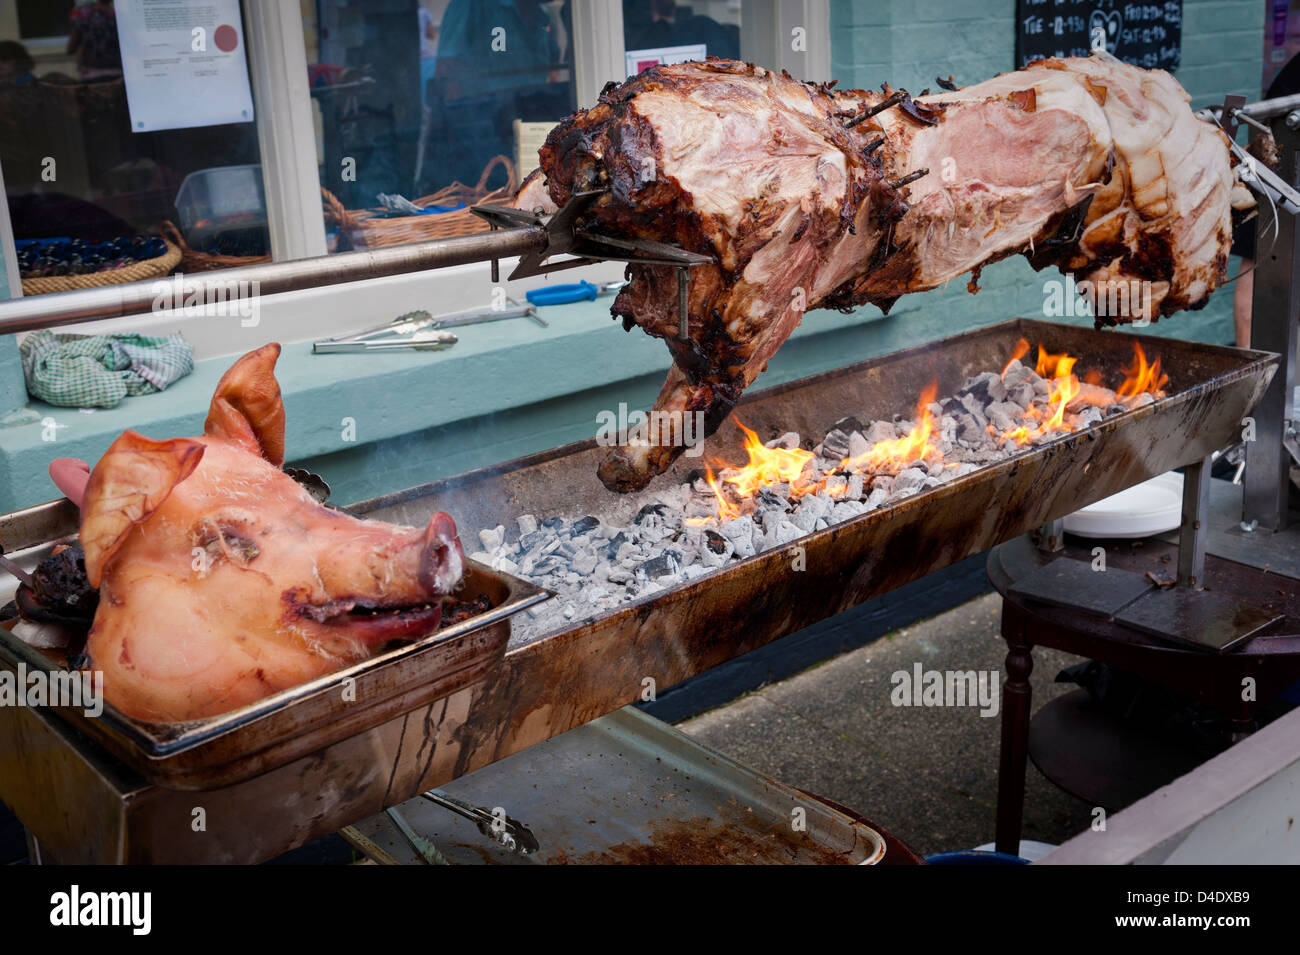 Hog roast on a barbecue spit, UK Stock Photo